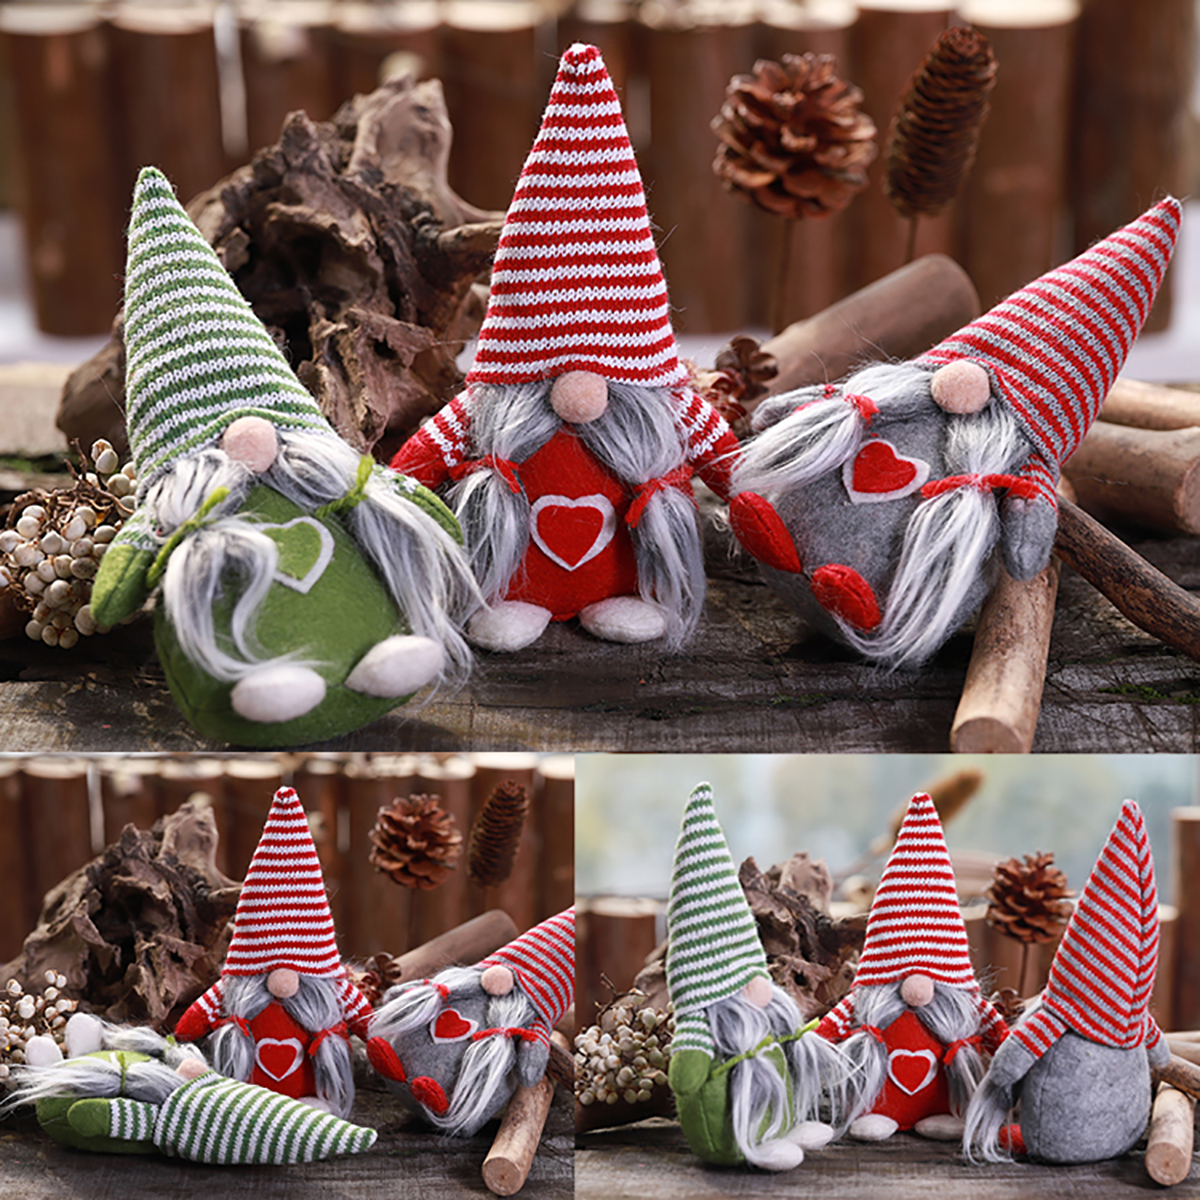 Non-Woven-Hat-With-Heart-Handmade-Gnome-Santa-Christmas-Figurines-Ornament-Holiday-Table-Decorations-1634099-4